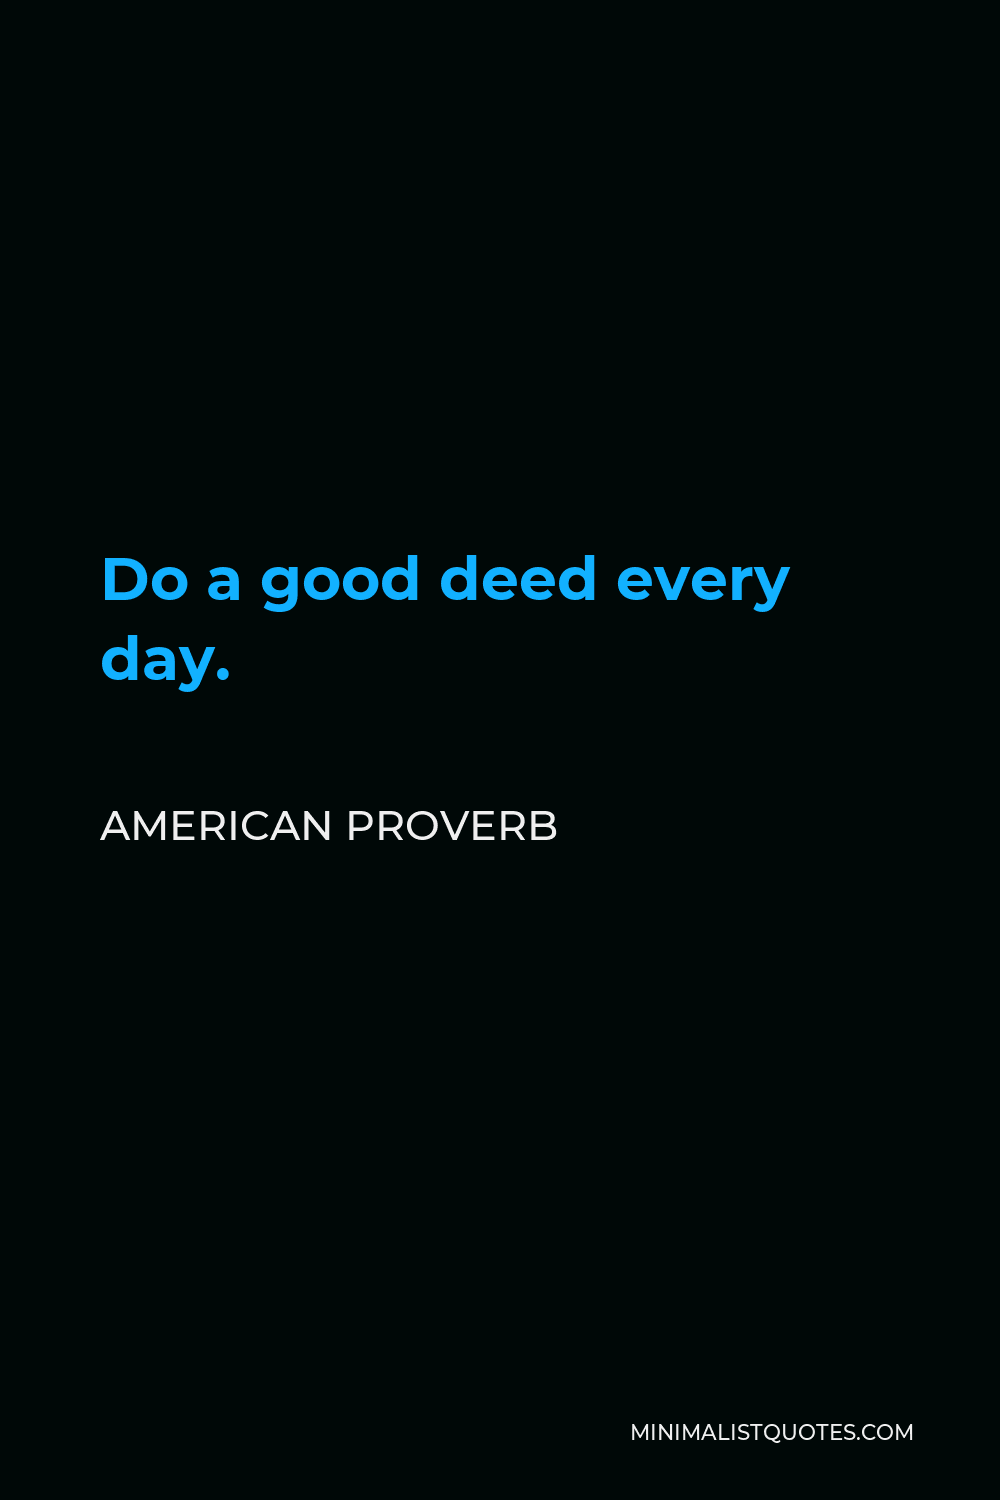 American Proverb Quote - Do a good deed every day.